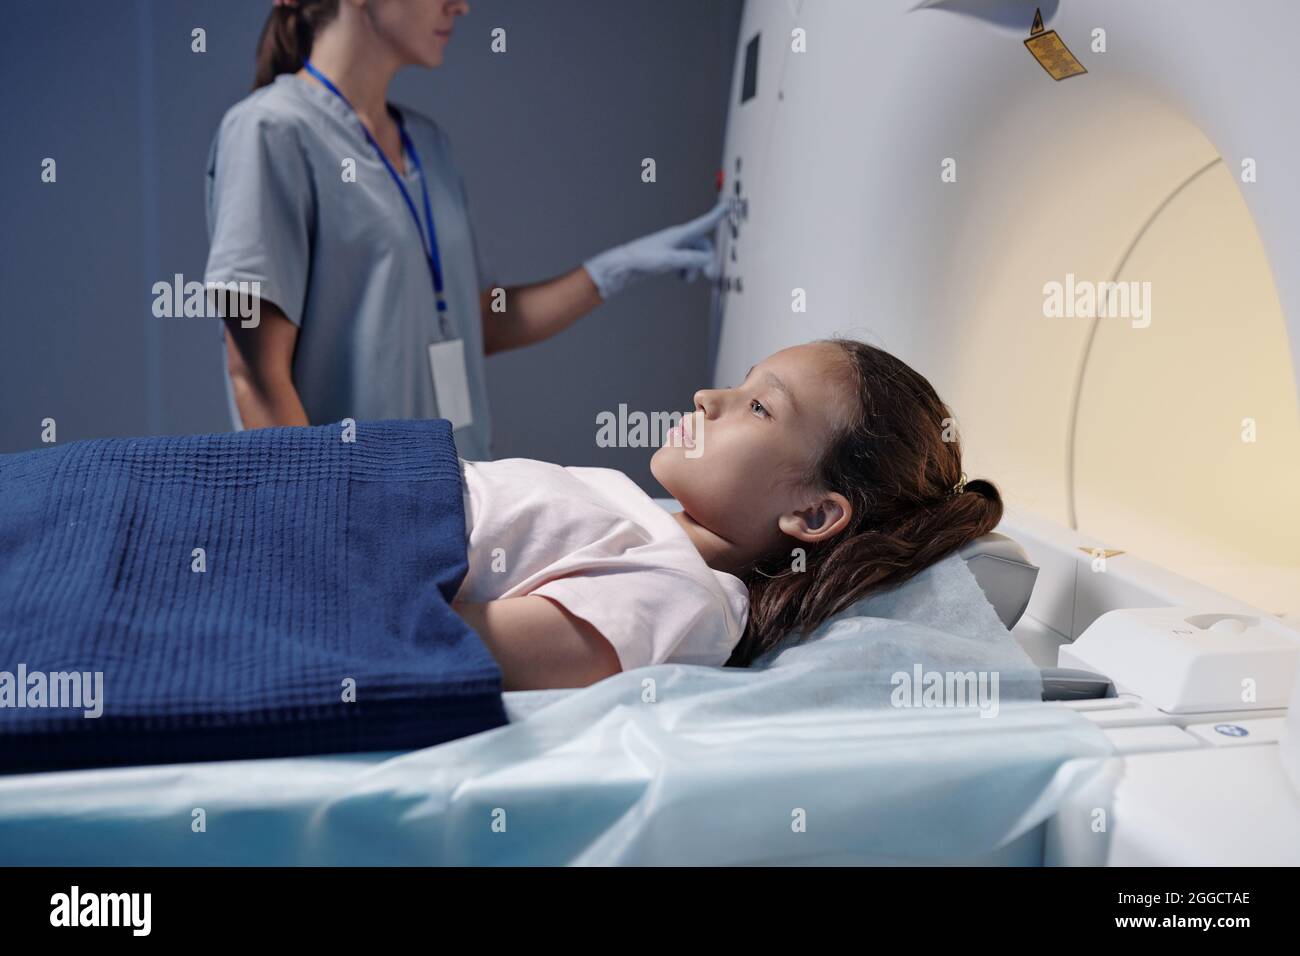 Adorable little girl undergoing computer tomography examination in scanning machine Stock Photo